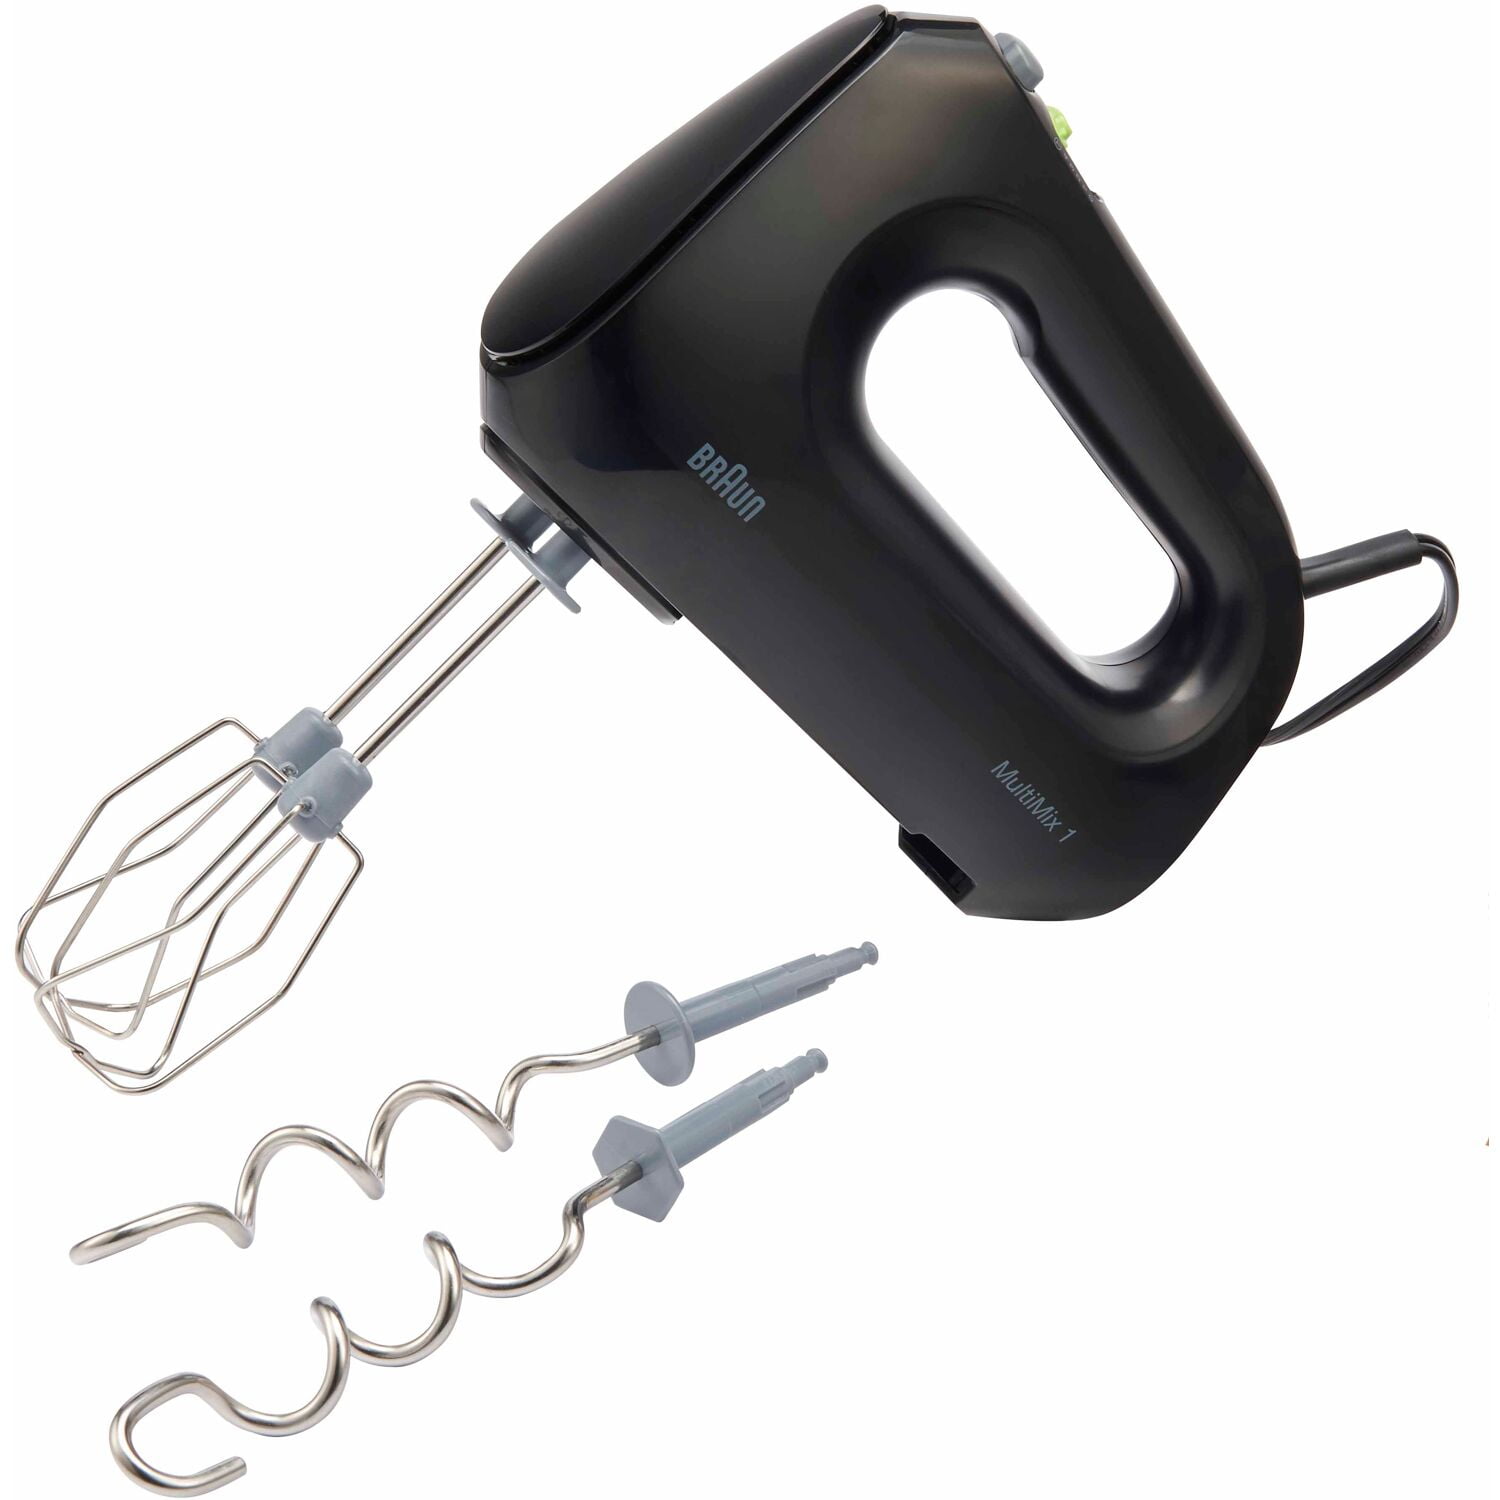 Braun Multi Mix 1 Hand Mixer with Beaters, Dough Hooks and Accessory Bag 